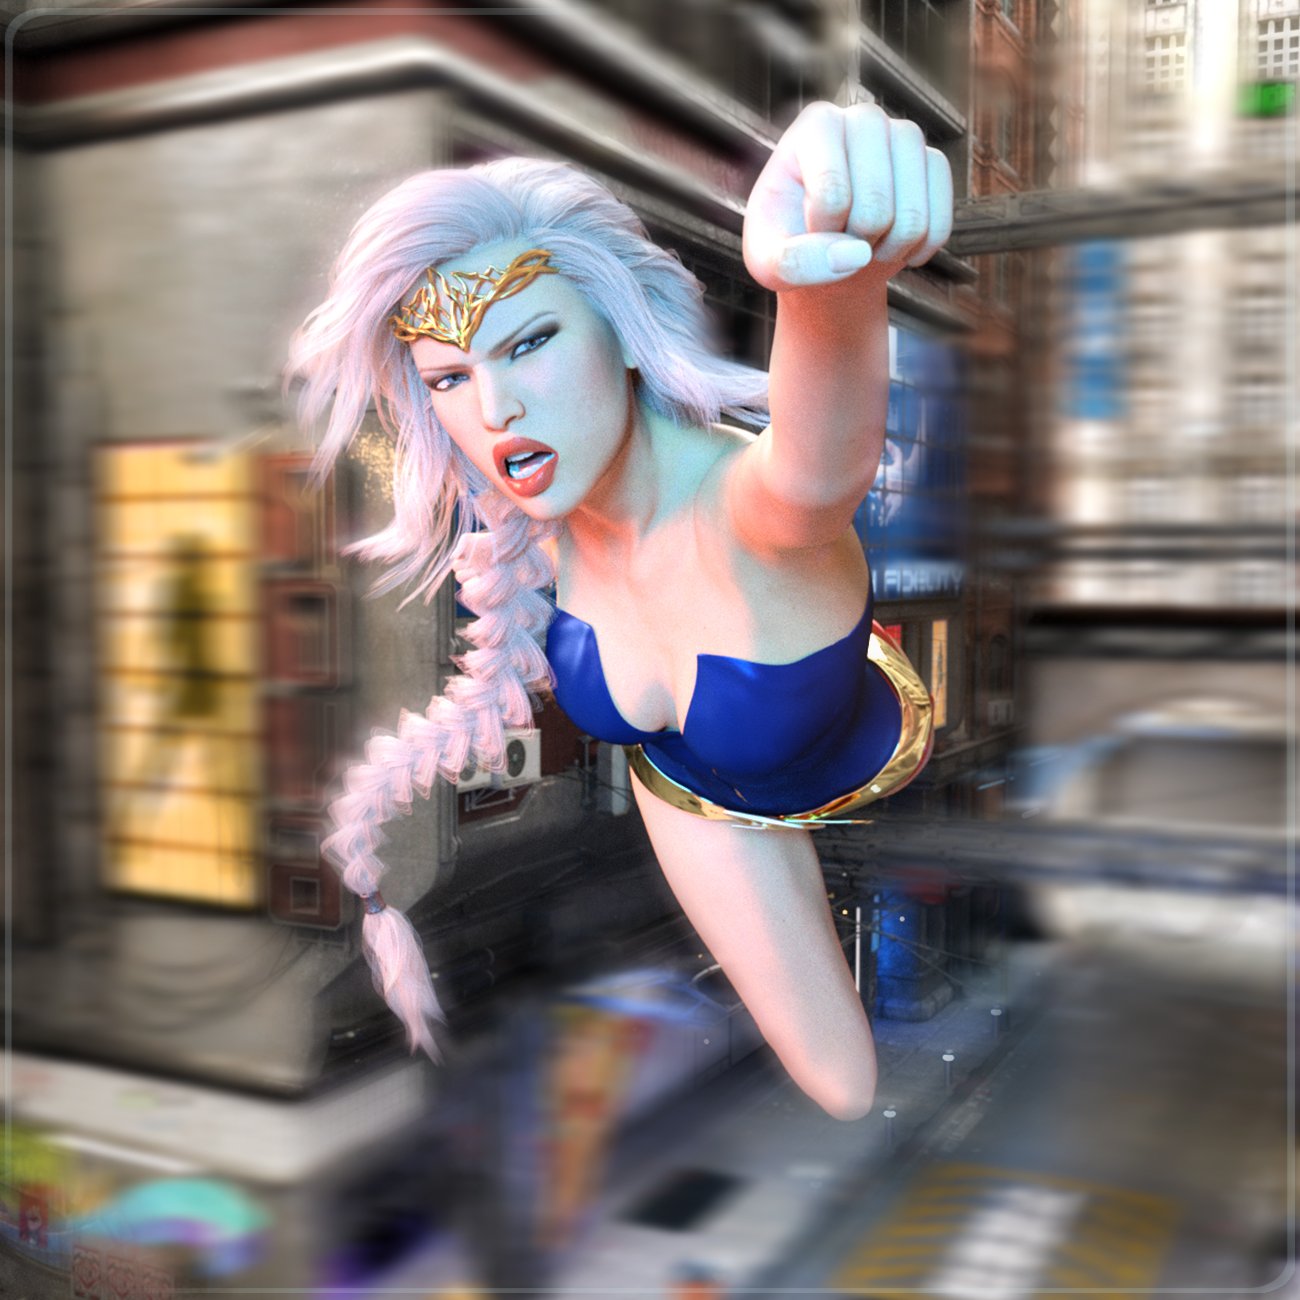 Z Super Heroine - Poses and Partials for Genesis 3 and 8 Female by: Zeddicuss, 3D Models by Daz 3D